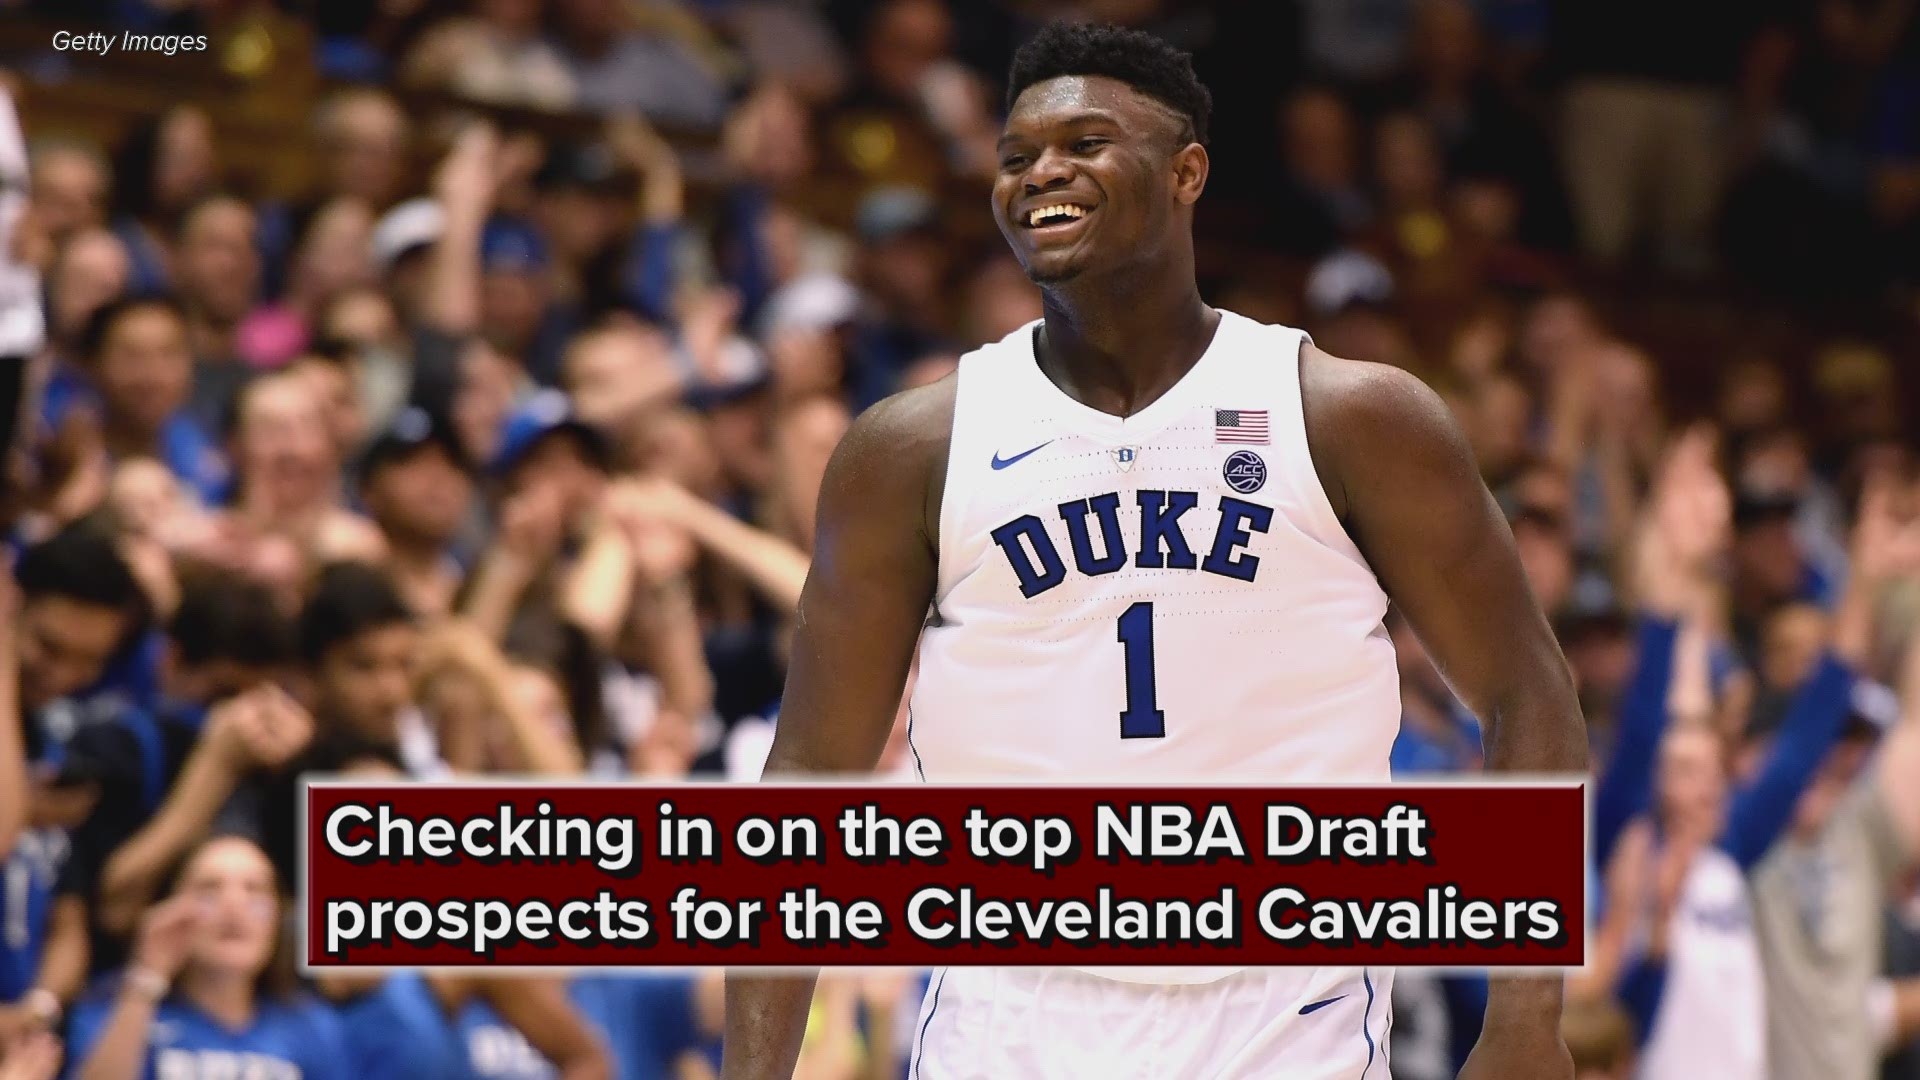 For the first time since 2014, the Cleveland Cavaliers appear poised for a top-five pick in the NBA Draft.